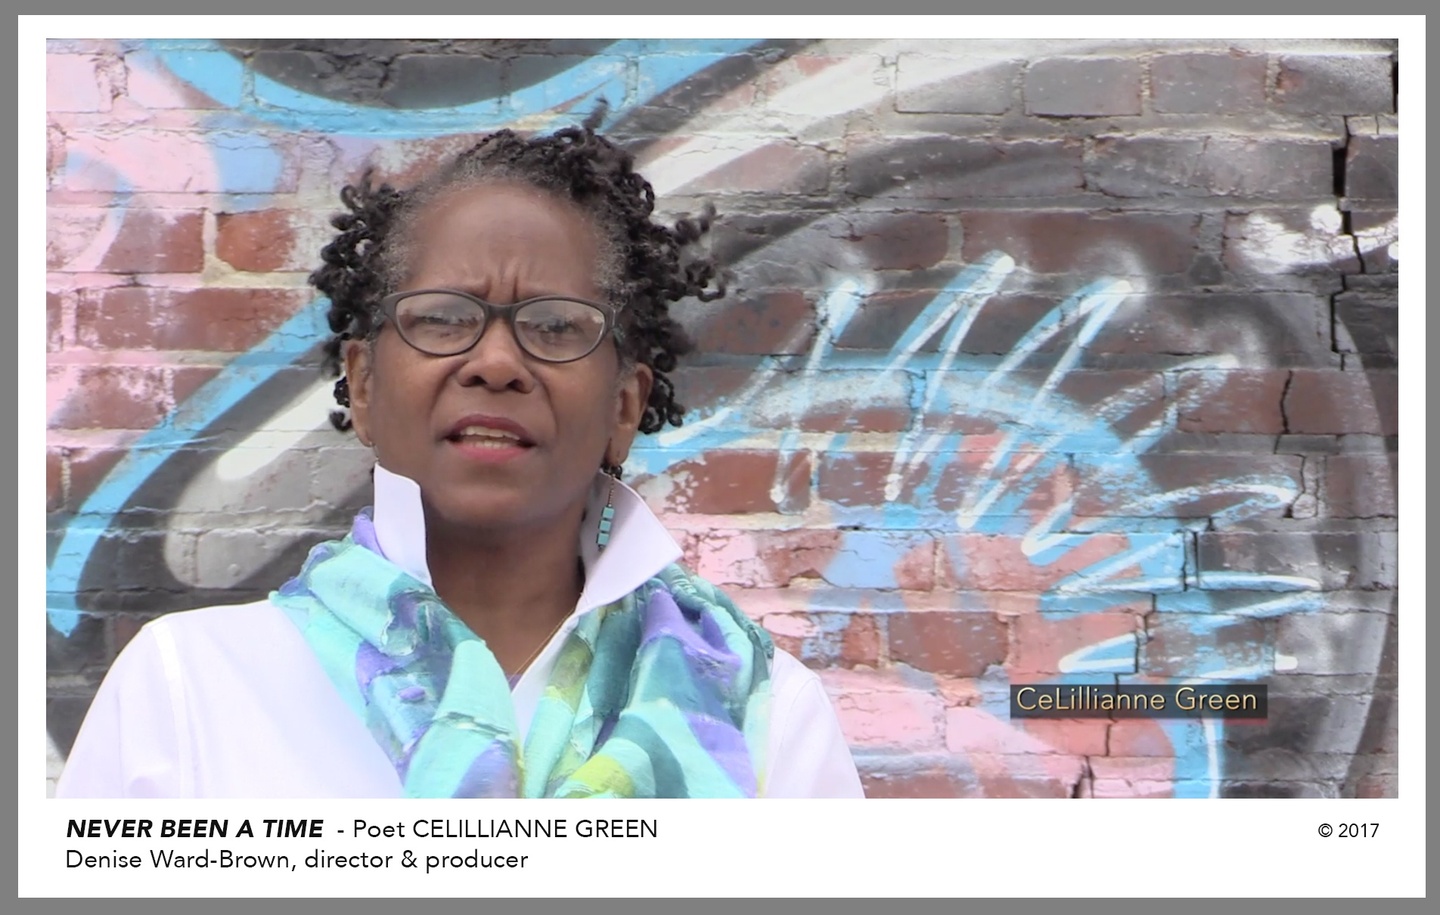 Text reads, "NEVER BEEN A TIME - Poet CELILLIANNE GREEN", below a still from the video, in which Green is filmed in front of a spray painted brick wall. Green wears a white collared shirt, black framed glasses, and a colorful, cool-toned scarf.